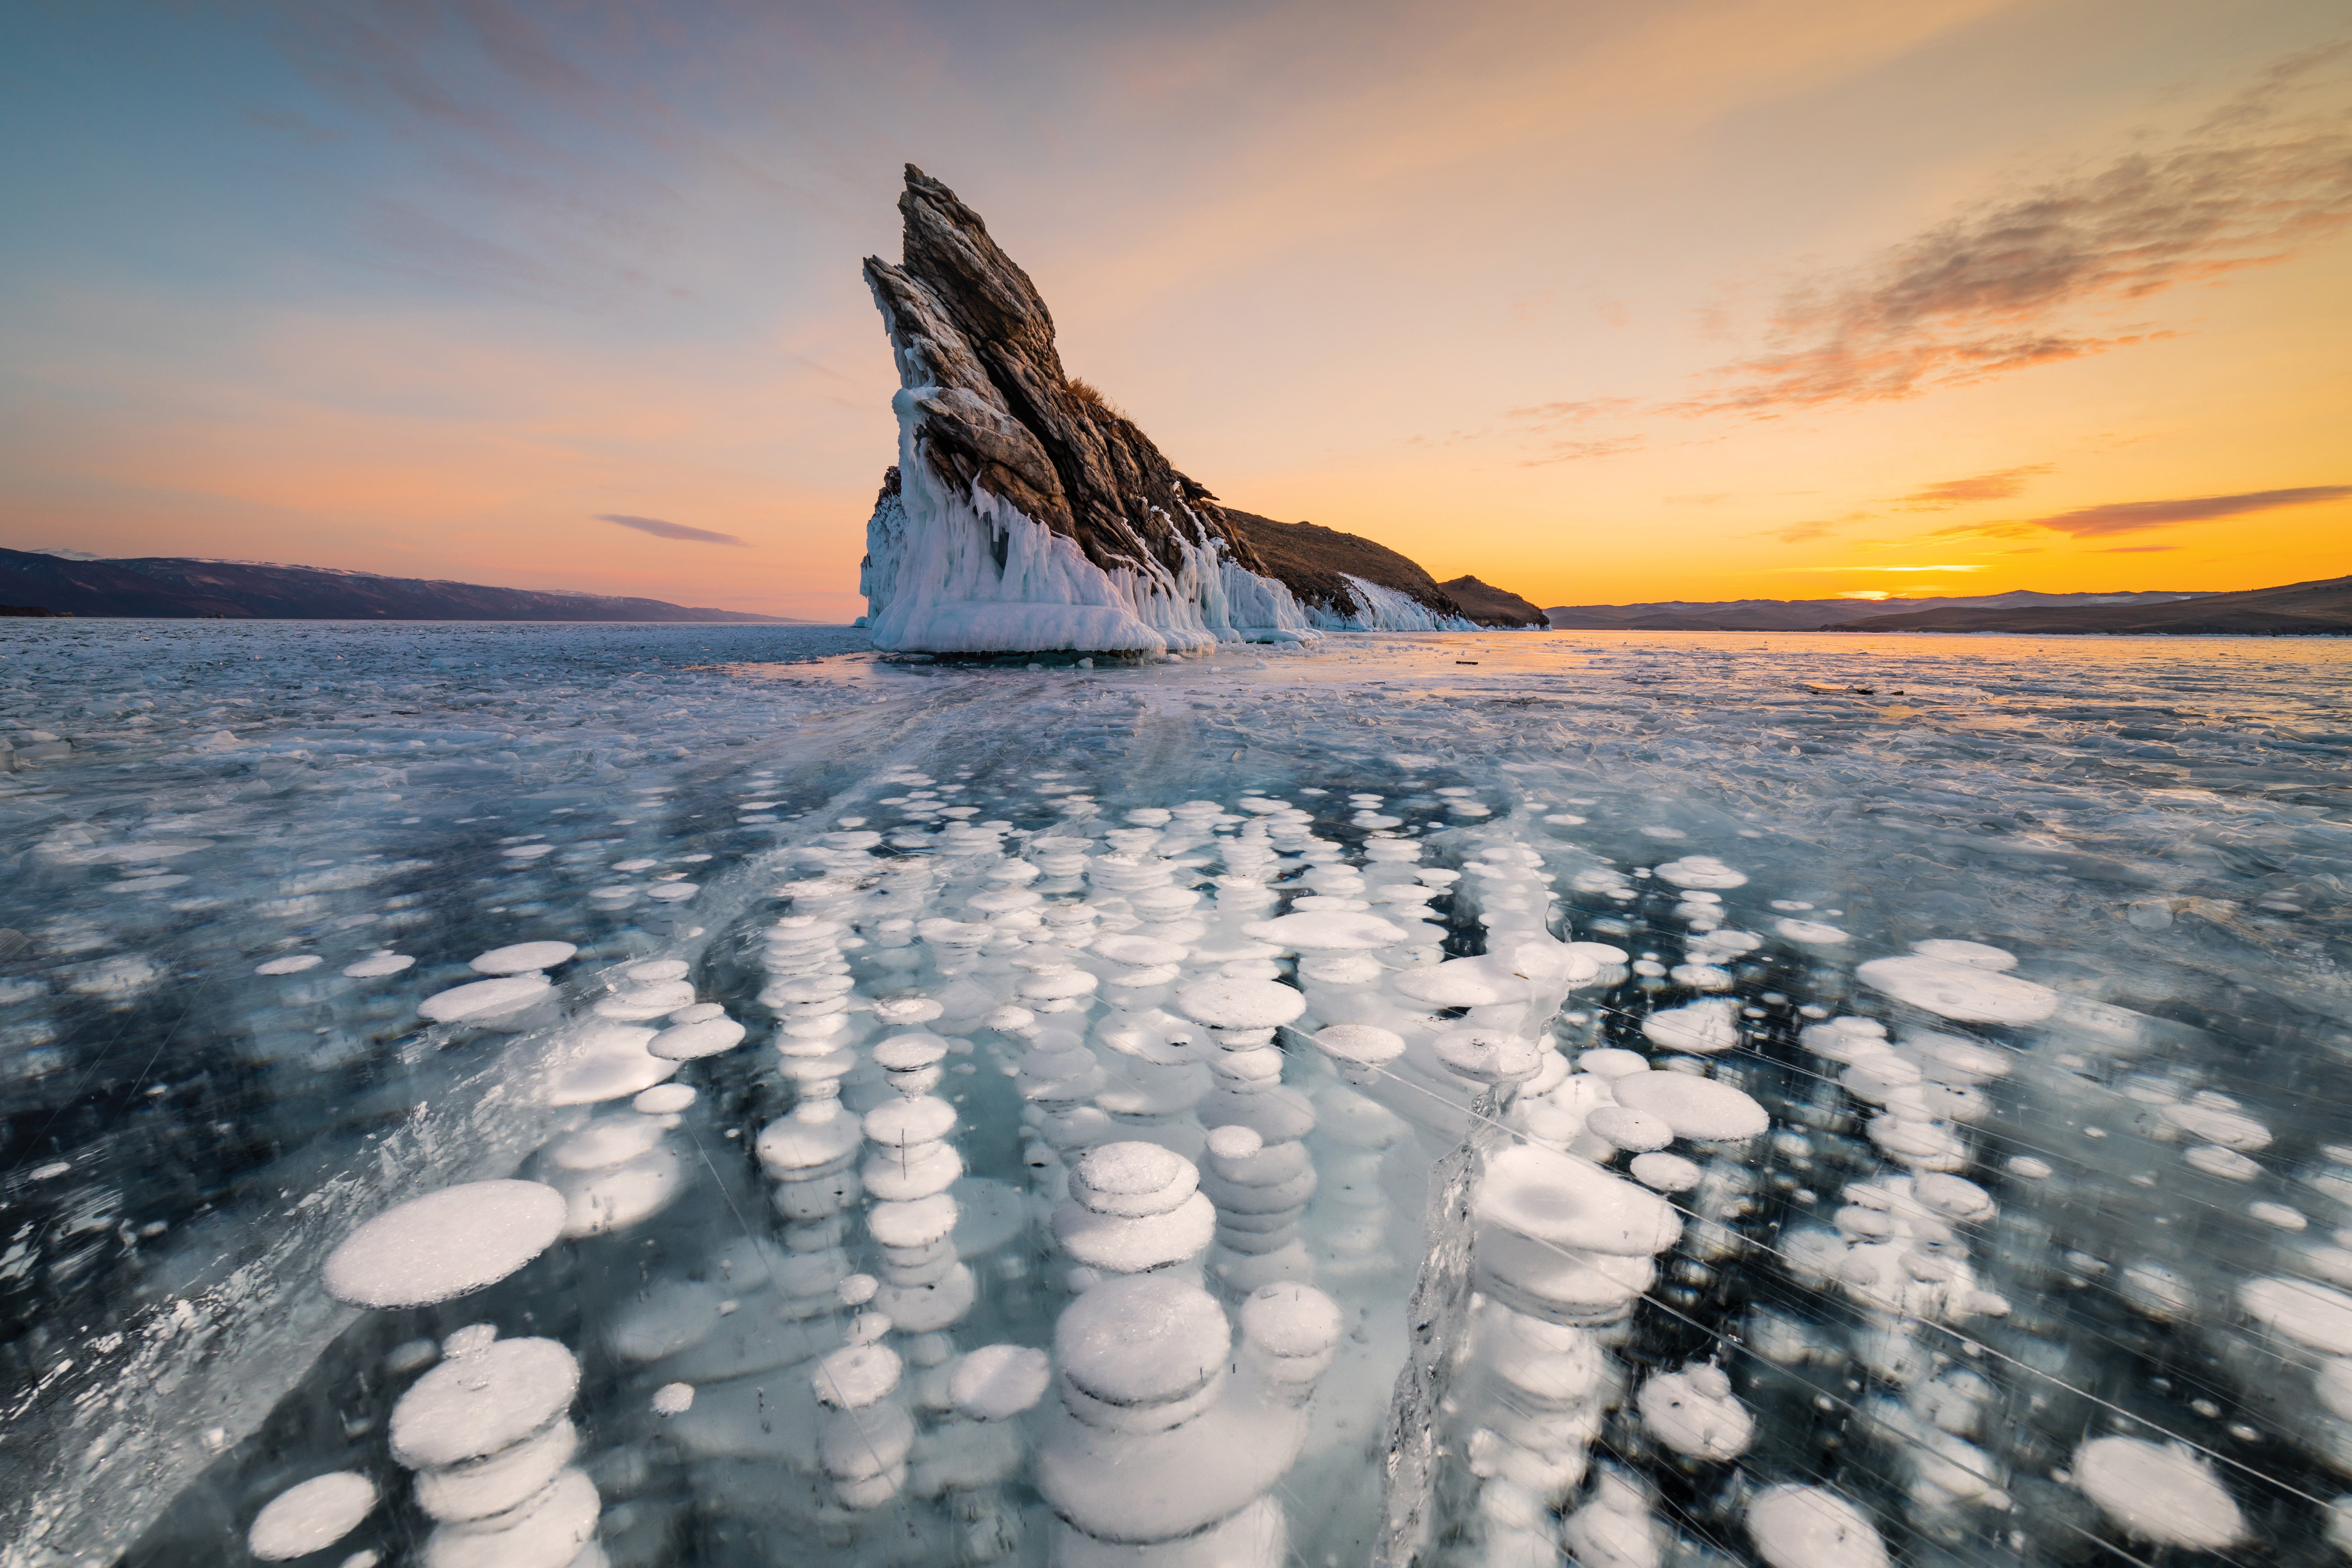 Image of ice bubbles beneath a body of water, with a cliff in the background with a sunset